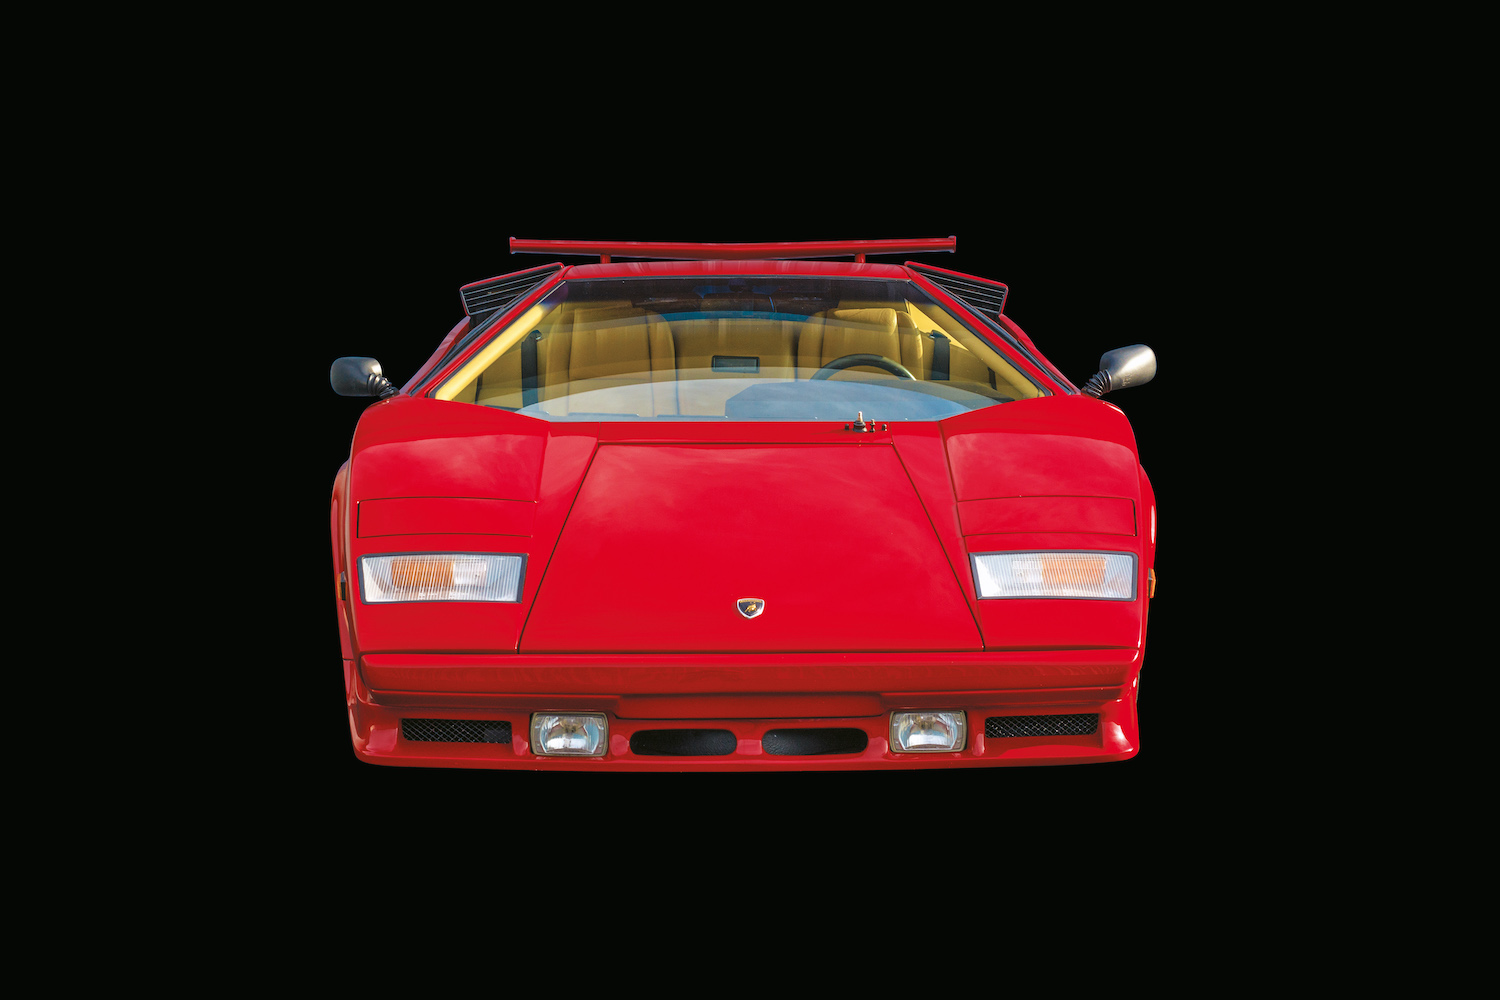 <strong>Matt Farah, 1988 Lamborghini Countach LP5000QV</strong><br>“As a kid of the ‘80s, there are certain iconic cars that just speak to you of that period. For me, the 911 is one, the Ferrari 308, but this Countach, which if you’ve ever sat in one, it’s like sitting in a living room — it’s huge inside. When Matt [Farah, host of <em>The Smoking Tire </em>podcast] pulled up with this in red, I just thought, wow, this is epic. A bunch of cars — like Spike [Feresten’s] car and [Paul] Zuckerman’s car and Matt’s car were all shot out at the Santa Monica airport where these guys all have hangars full of cars.”<br>